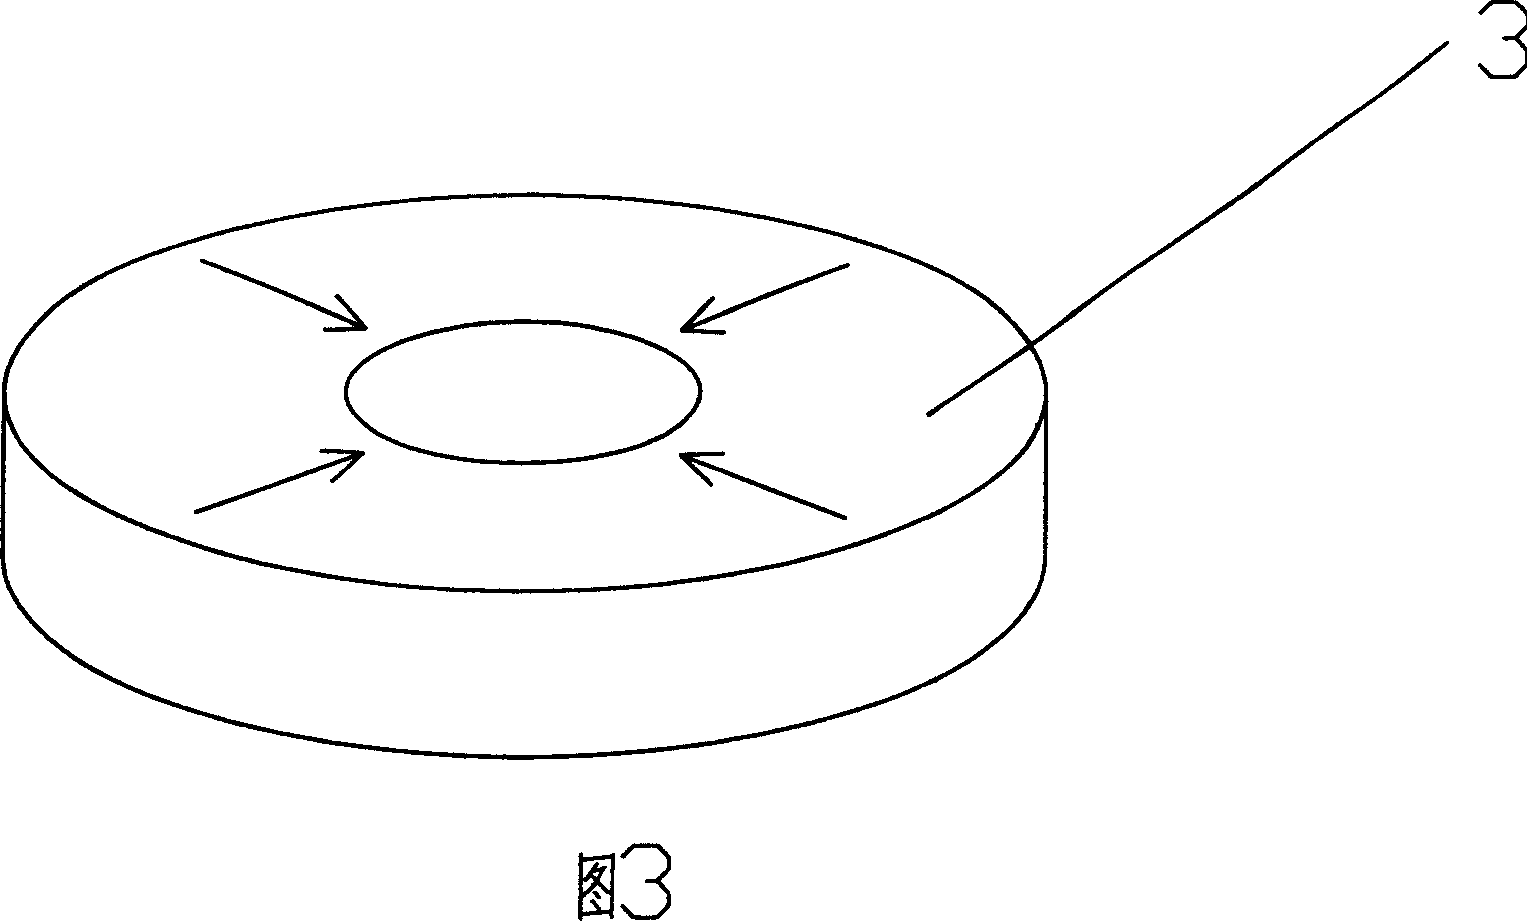 Magneto-thermo wax-proofing apparatus for oil exploitation